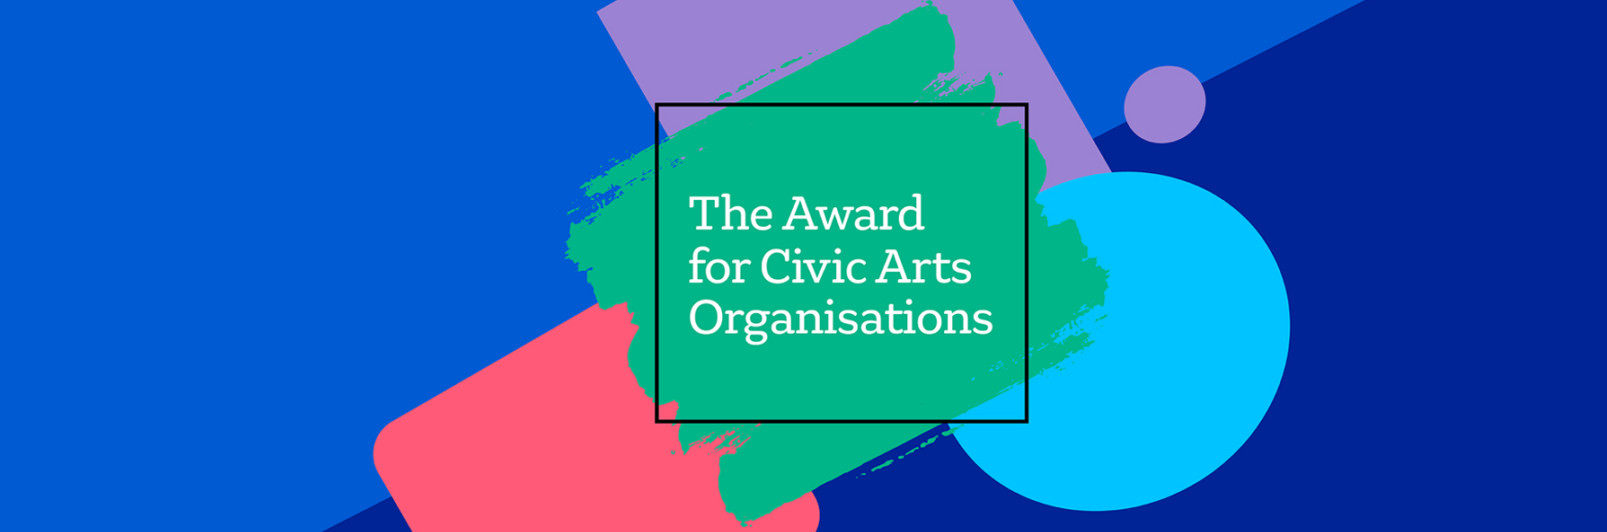 Shortlist announced for £150k award for civic arts organisations